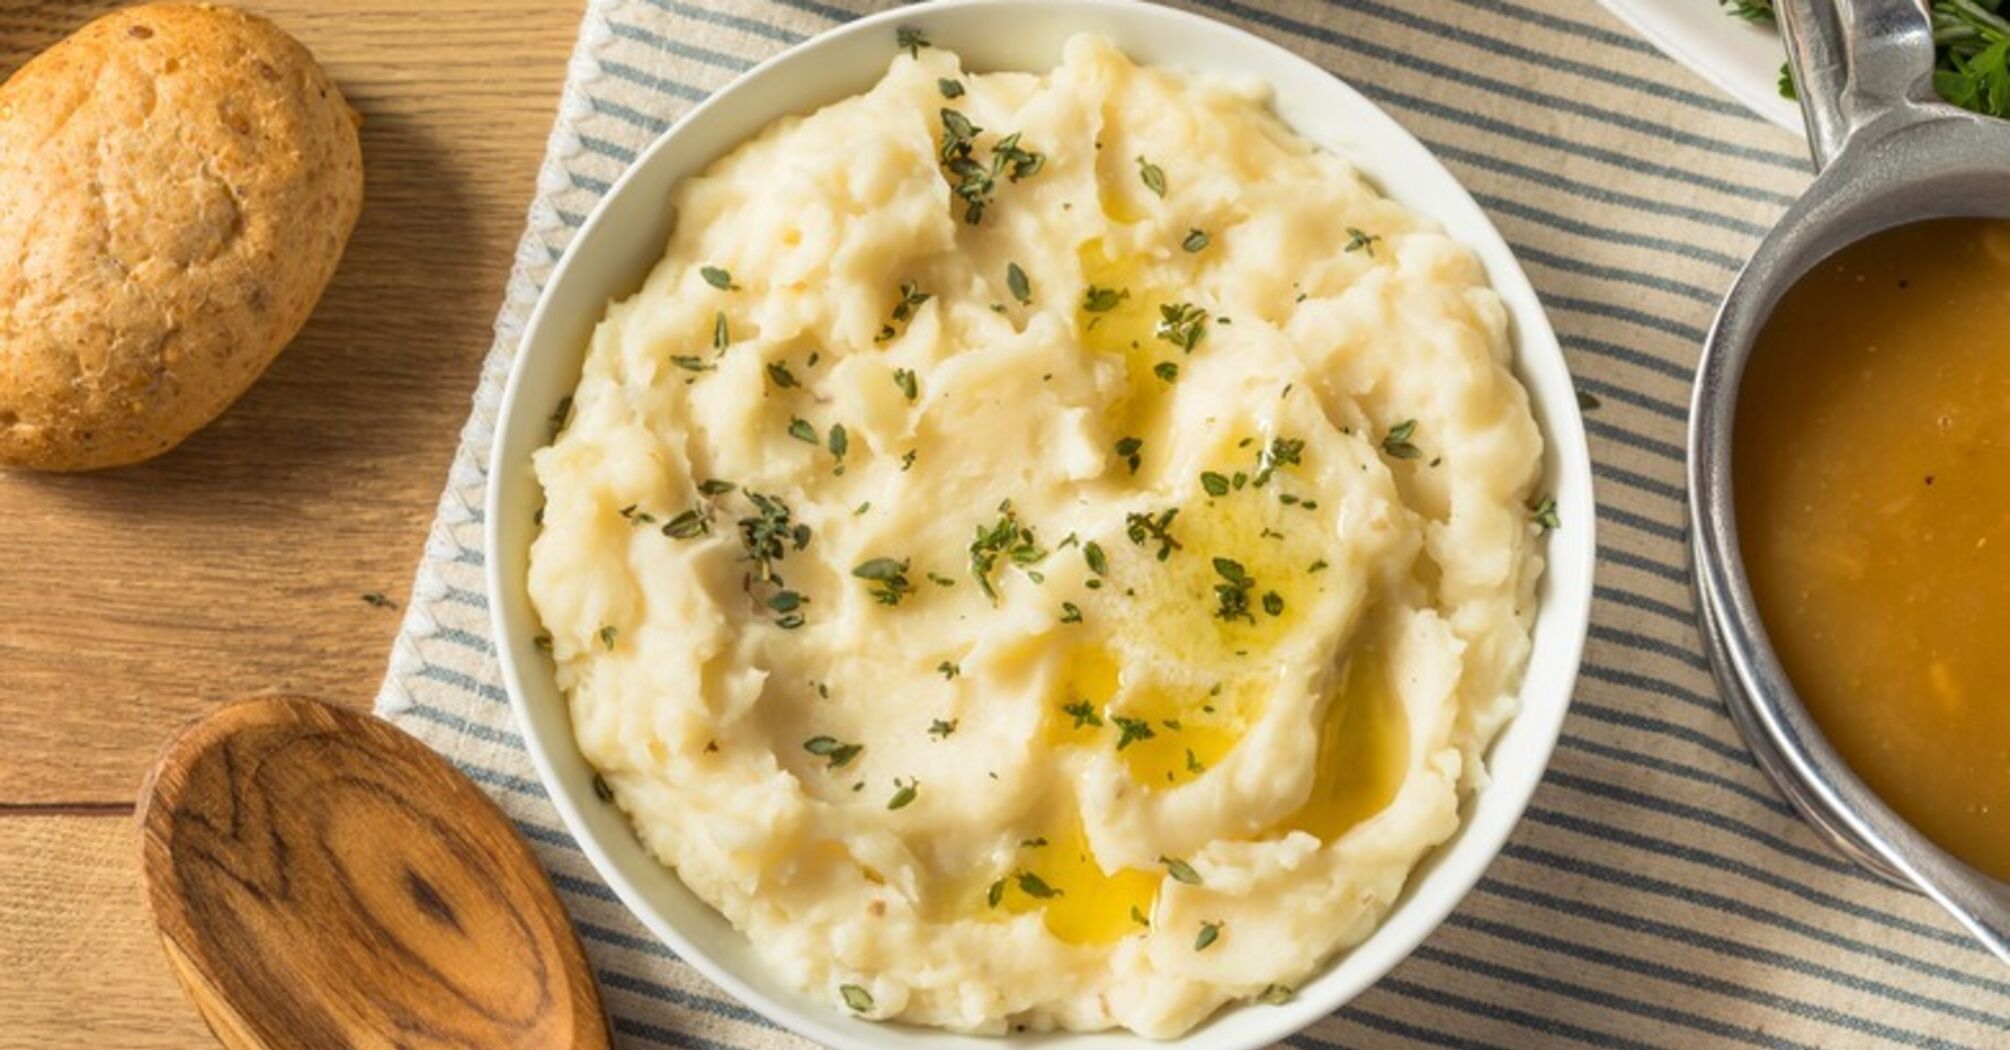 How to improve the taste of mashed potatoes